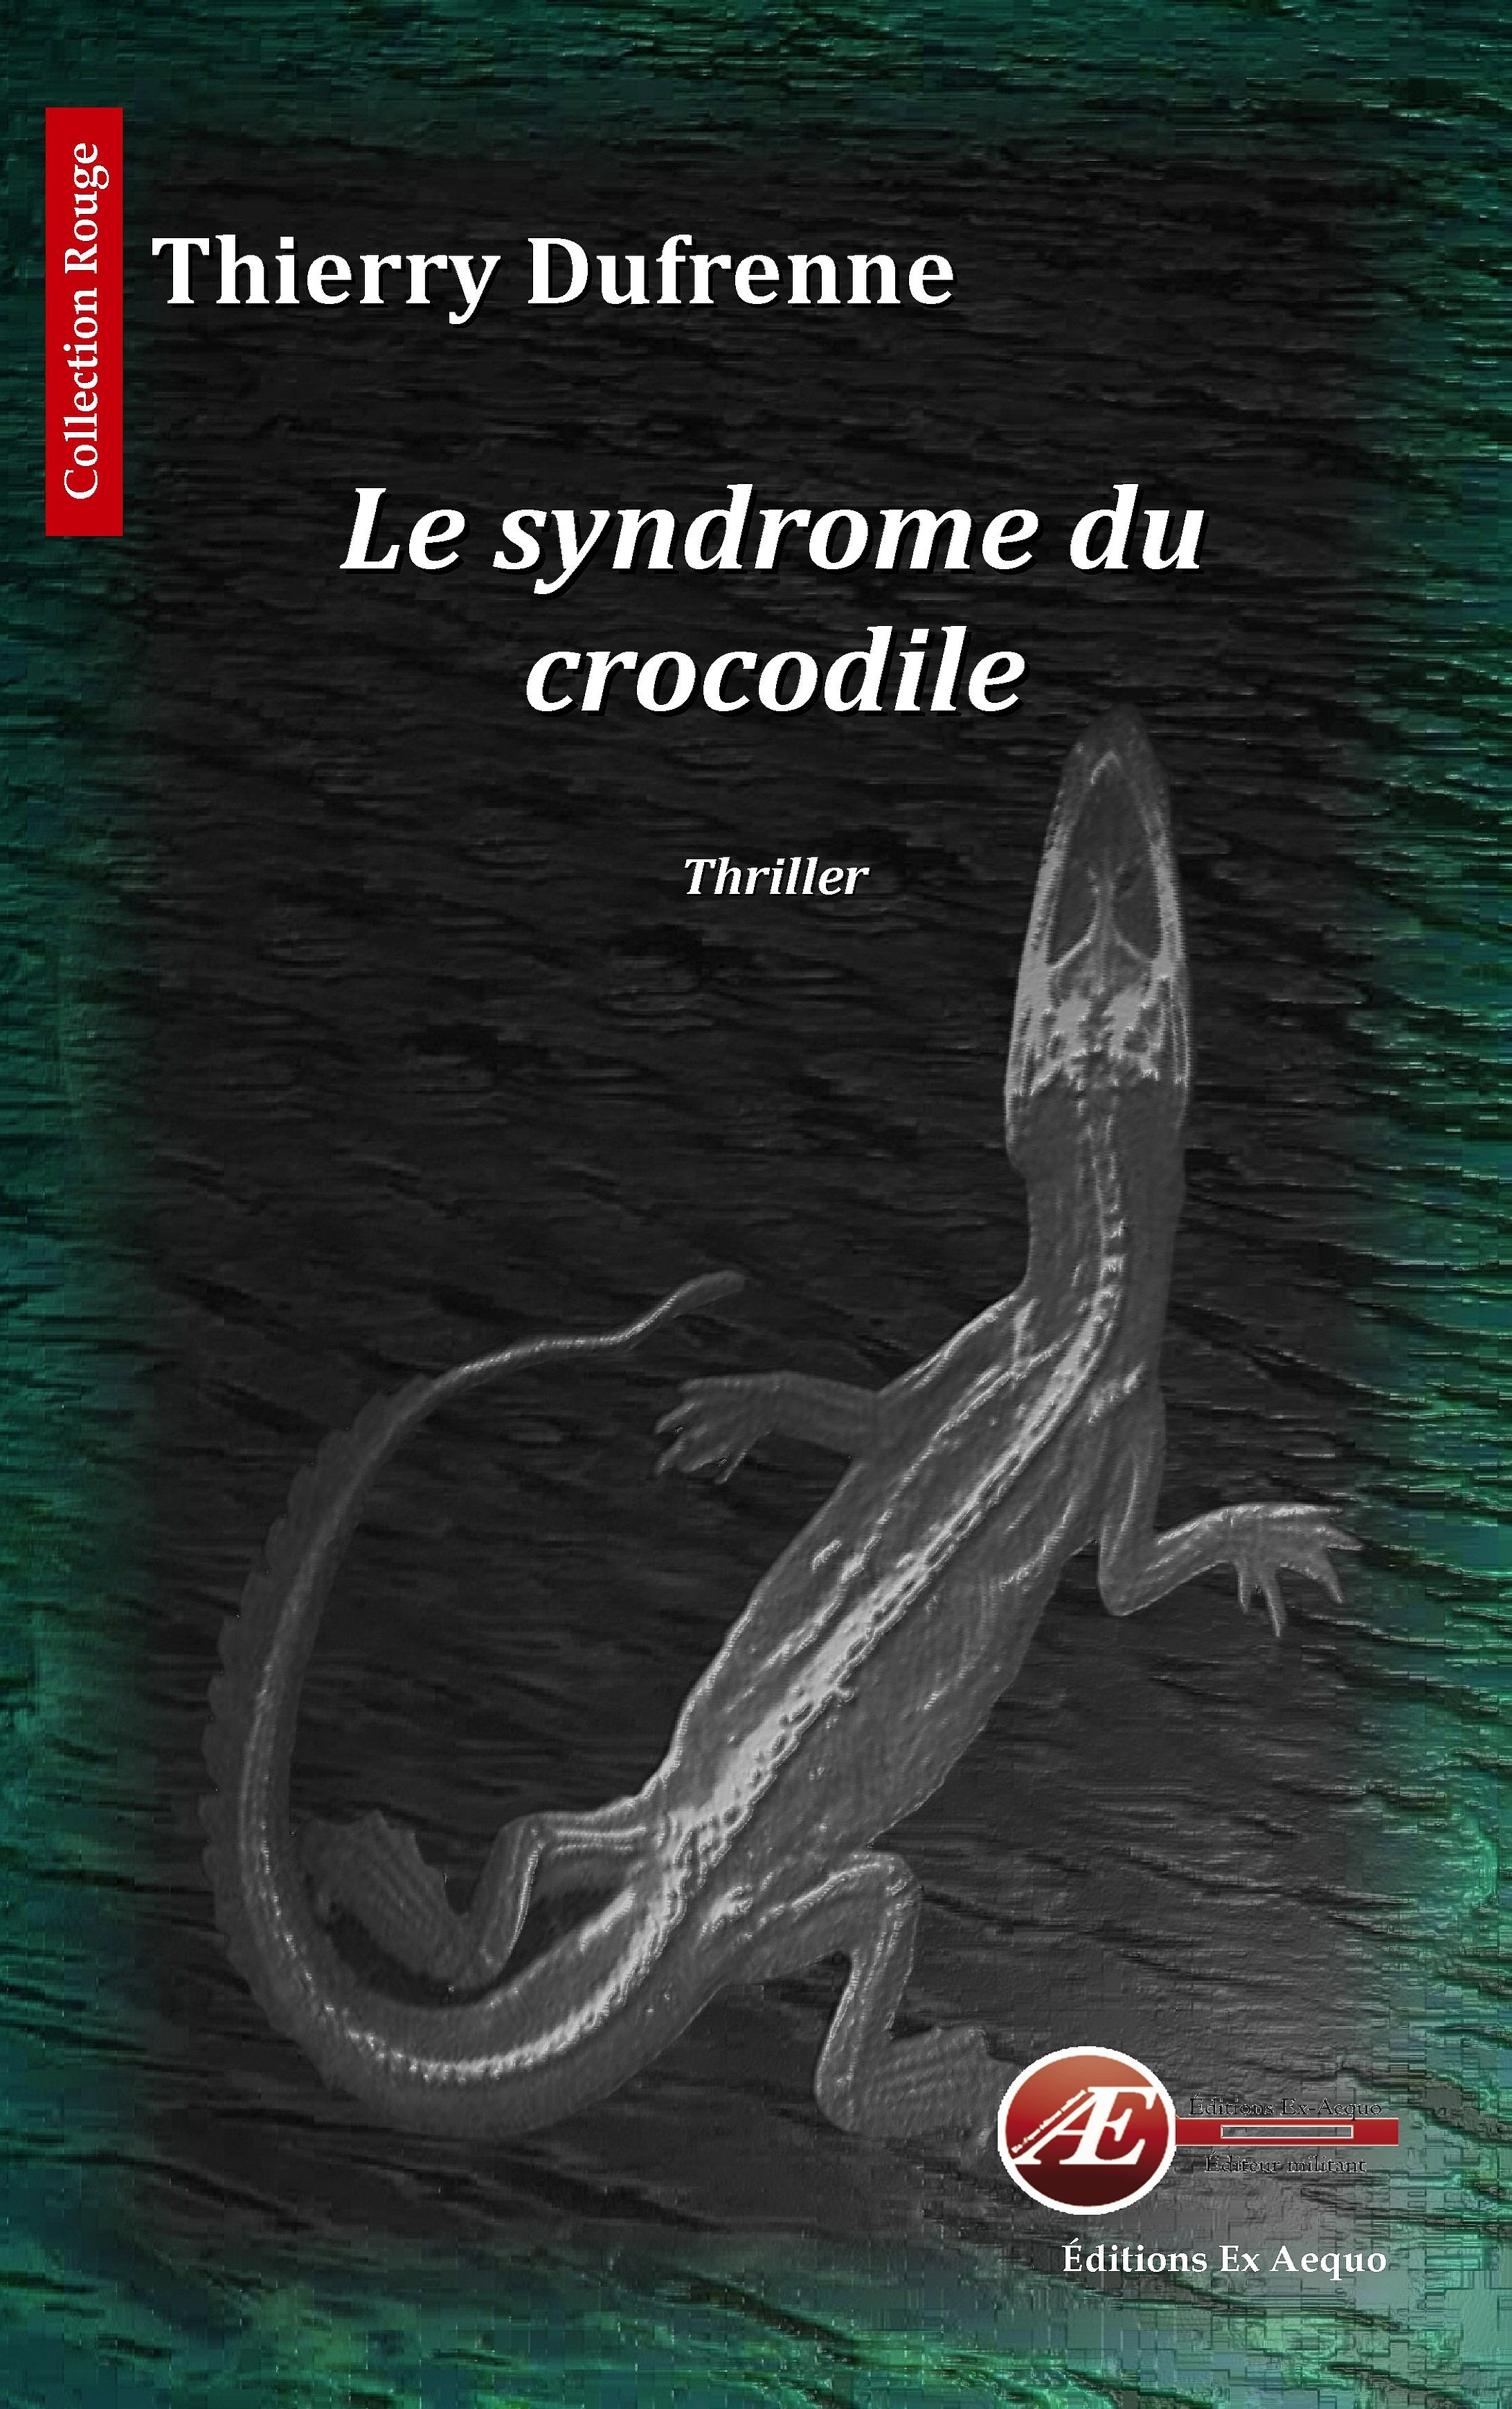 You are currently viewing Le syndrome du crocodile, de Thierry Dufrenne